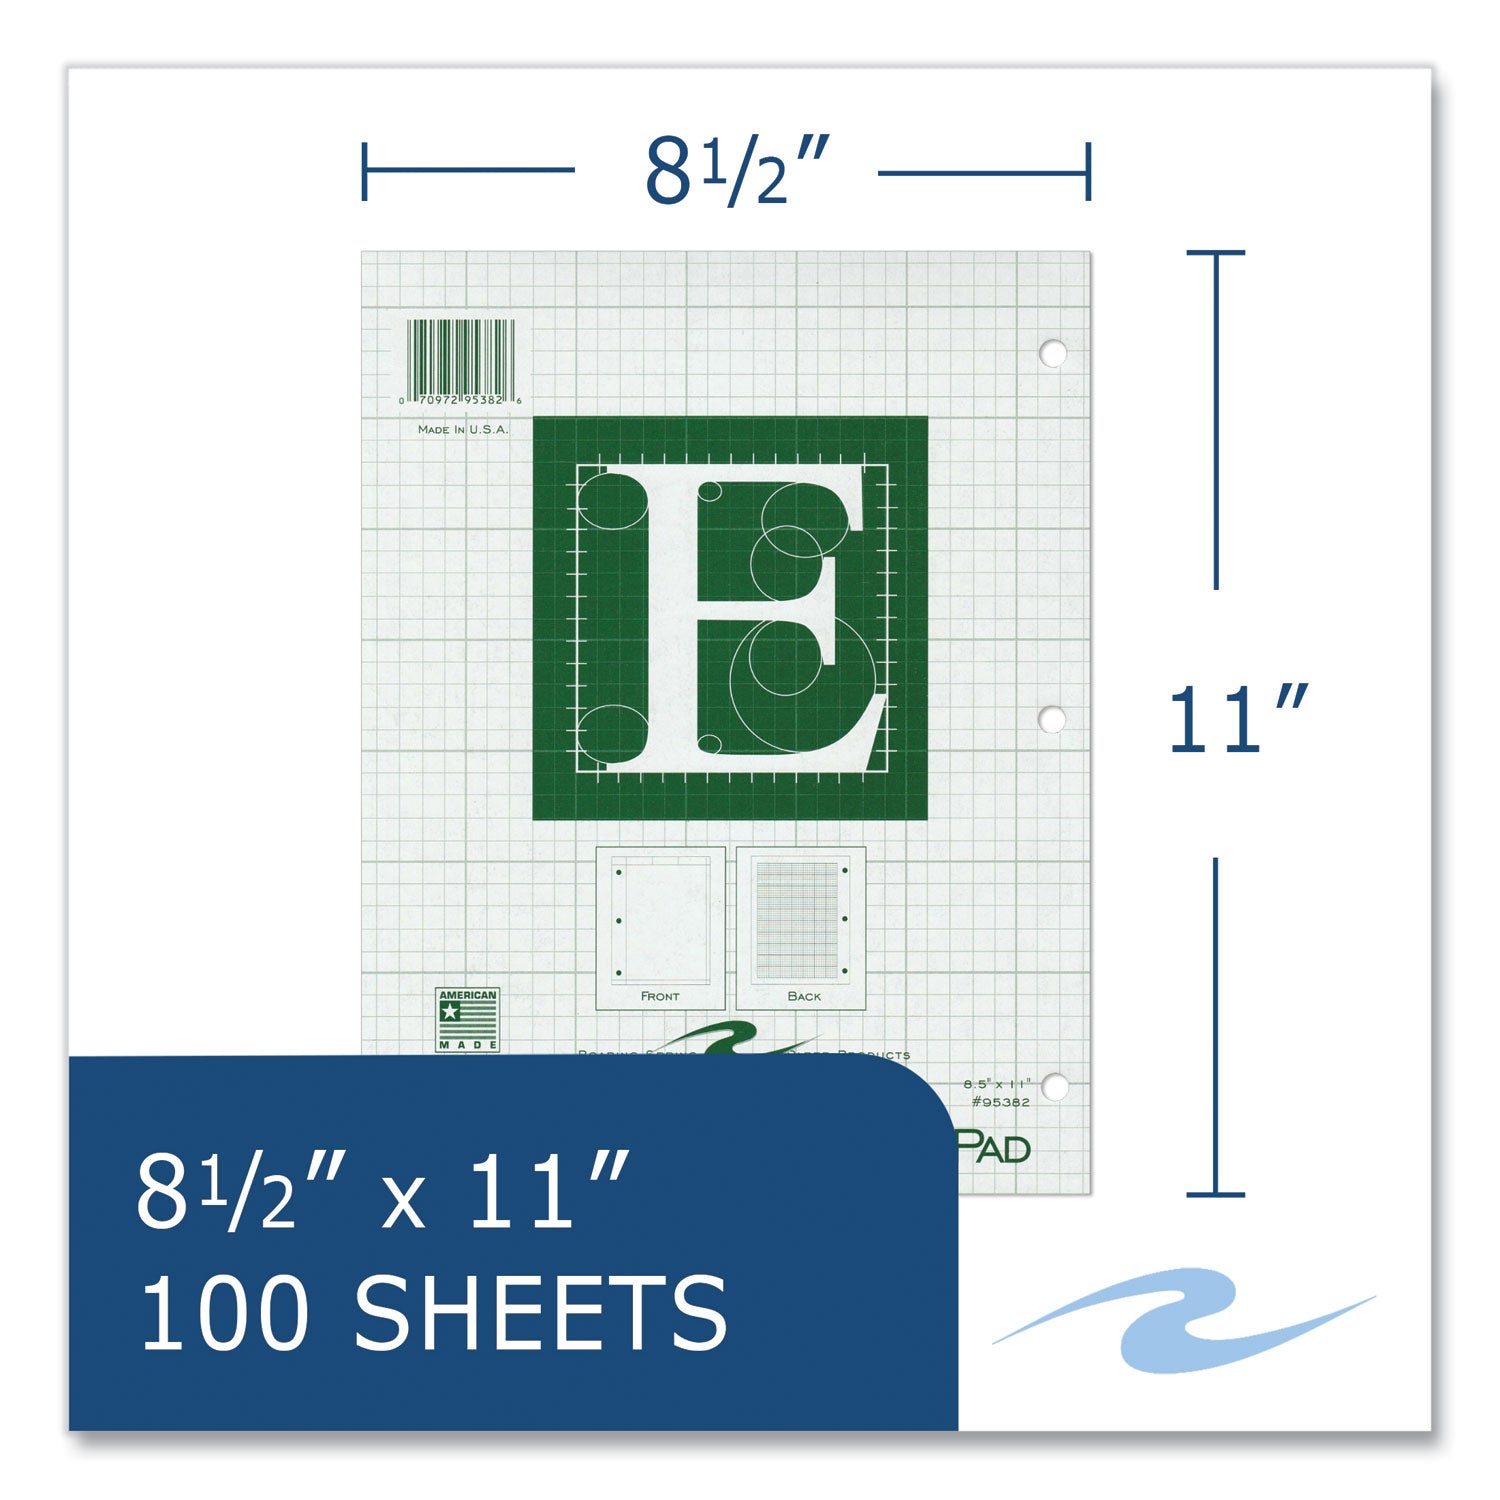 engineer-pad-05-margins-quad-rule-5-sq-in-1-sq-in-100-lt-green-85x11-sheets-pad-24-ct-ships-in-4-6-business-days_roa95382cs - 7